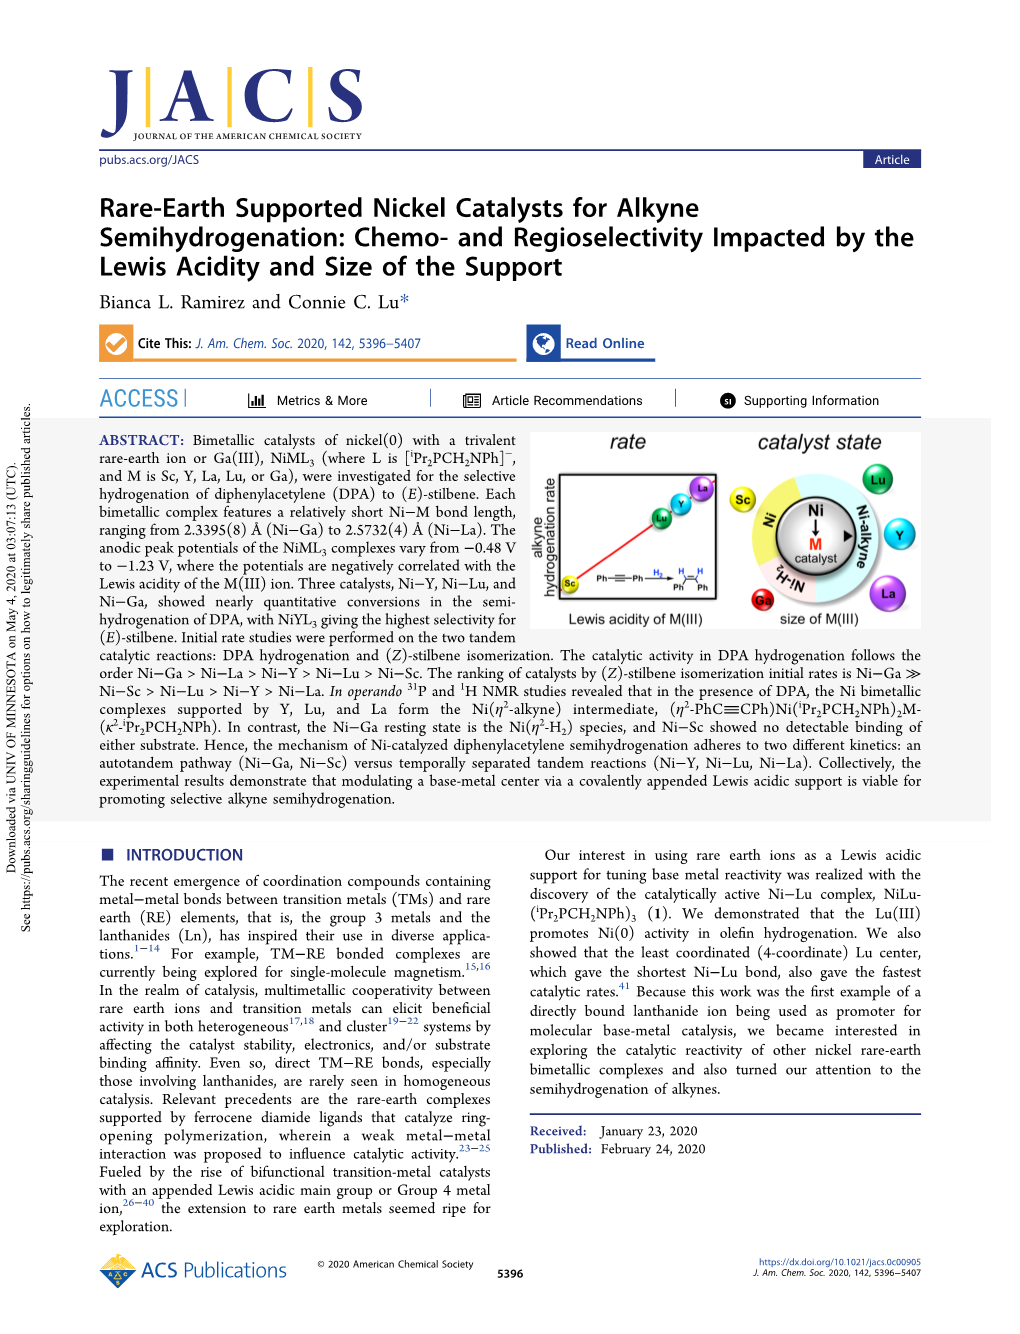 Rare-Earth Supported Nickel Catalysts for Alkyne Semihydrogenation: Chemo- and Regioselectivity Impacted by the Lewis Acidity and Size of the Support Bianca L